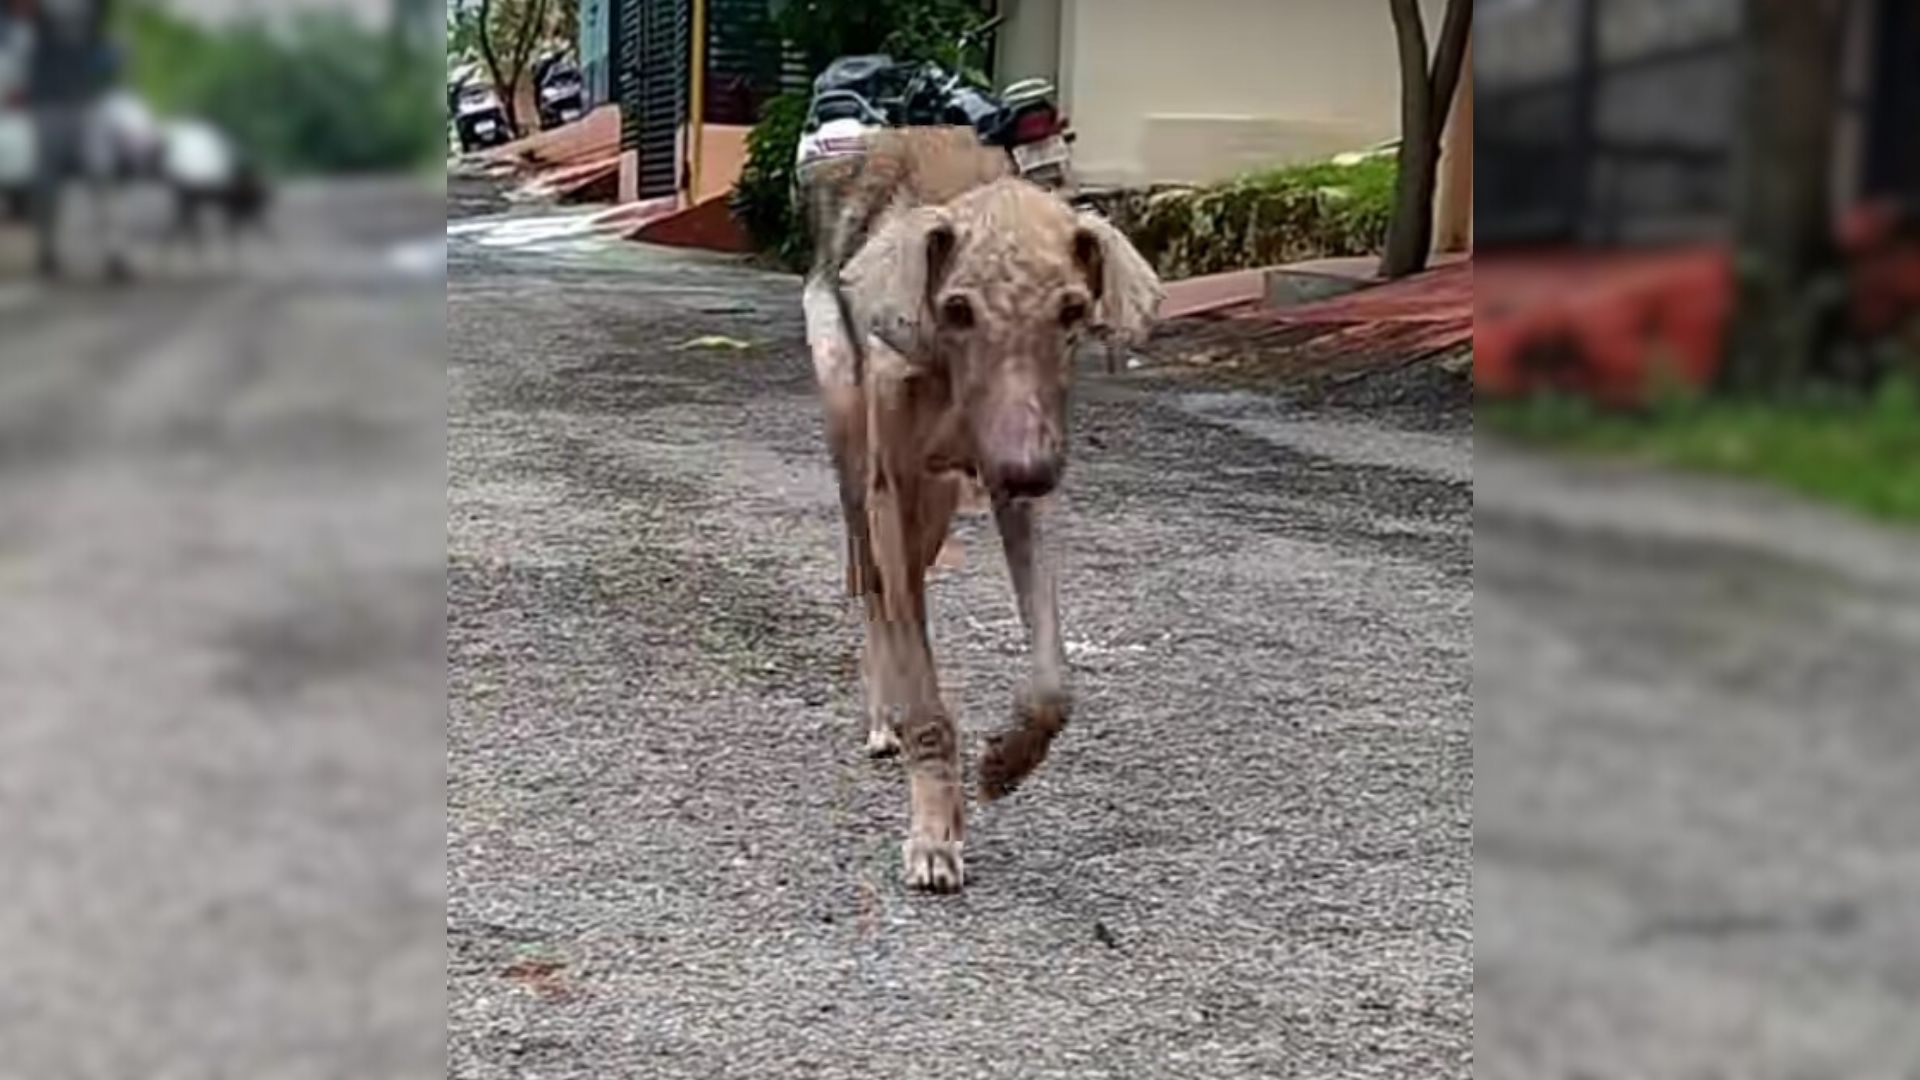 This Pup Was So Malnourished And Hurt That Rescuers Thought She Was An “Old Dog”